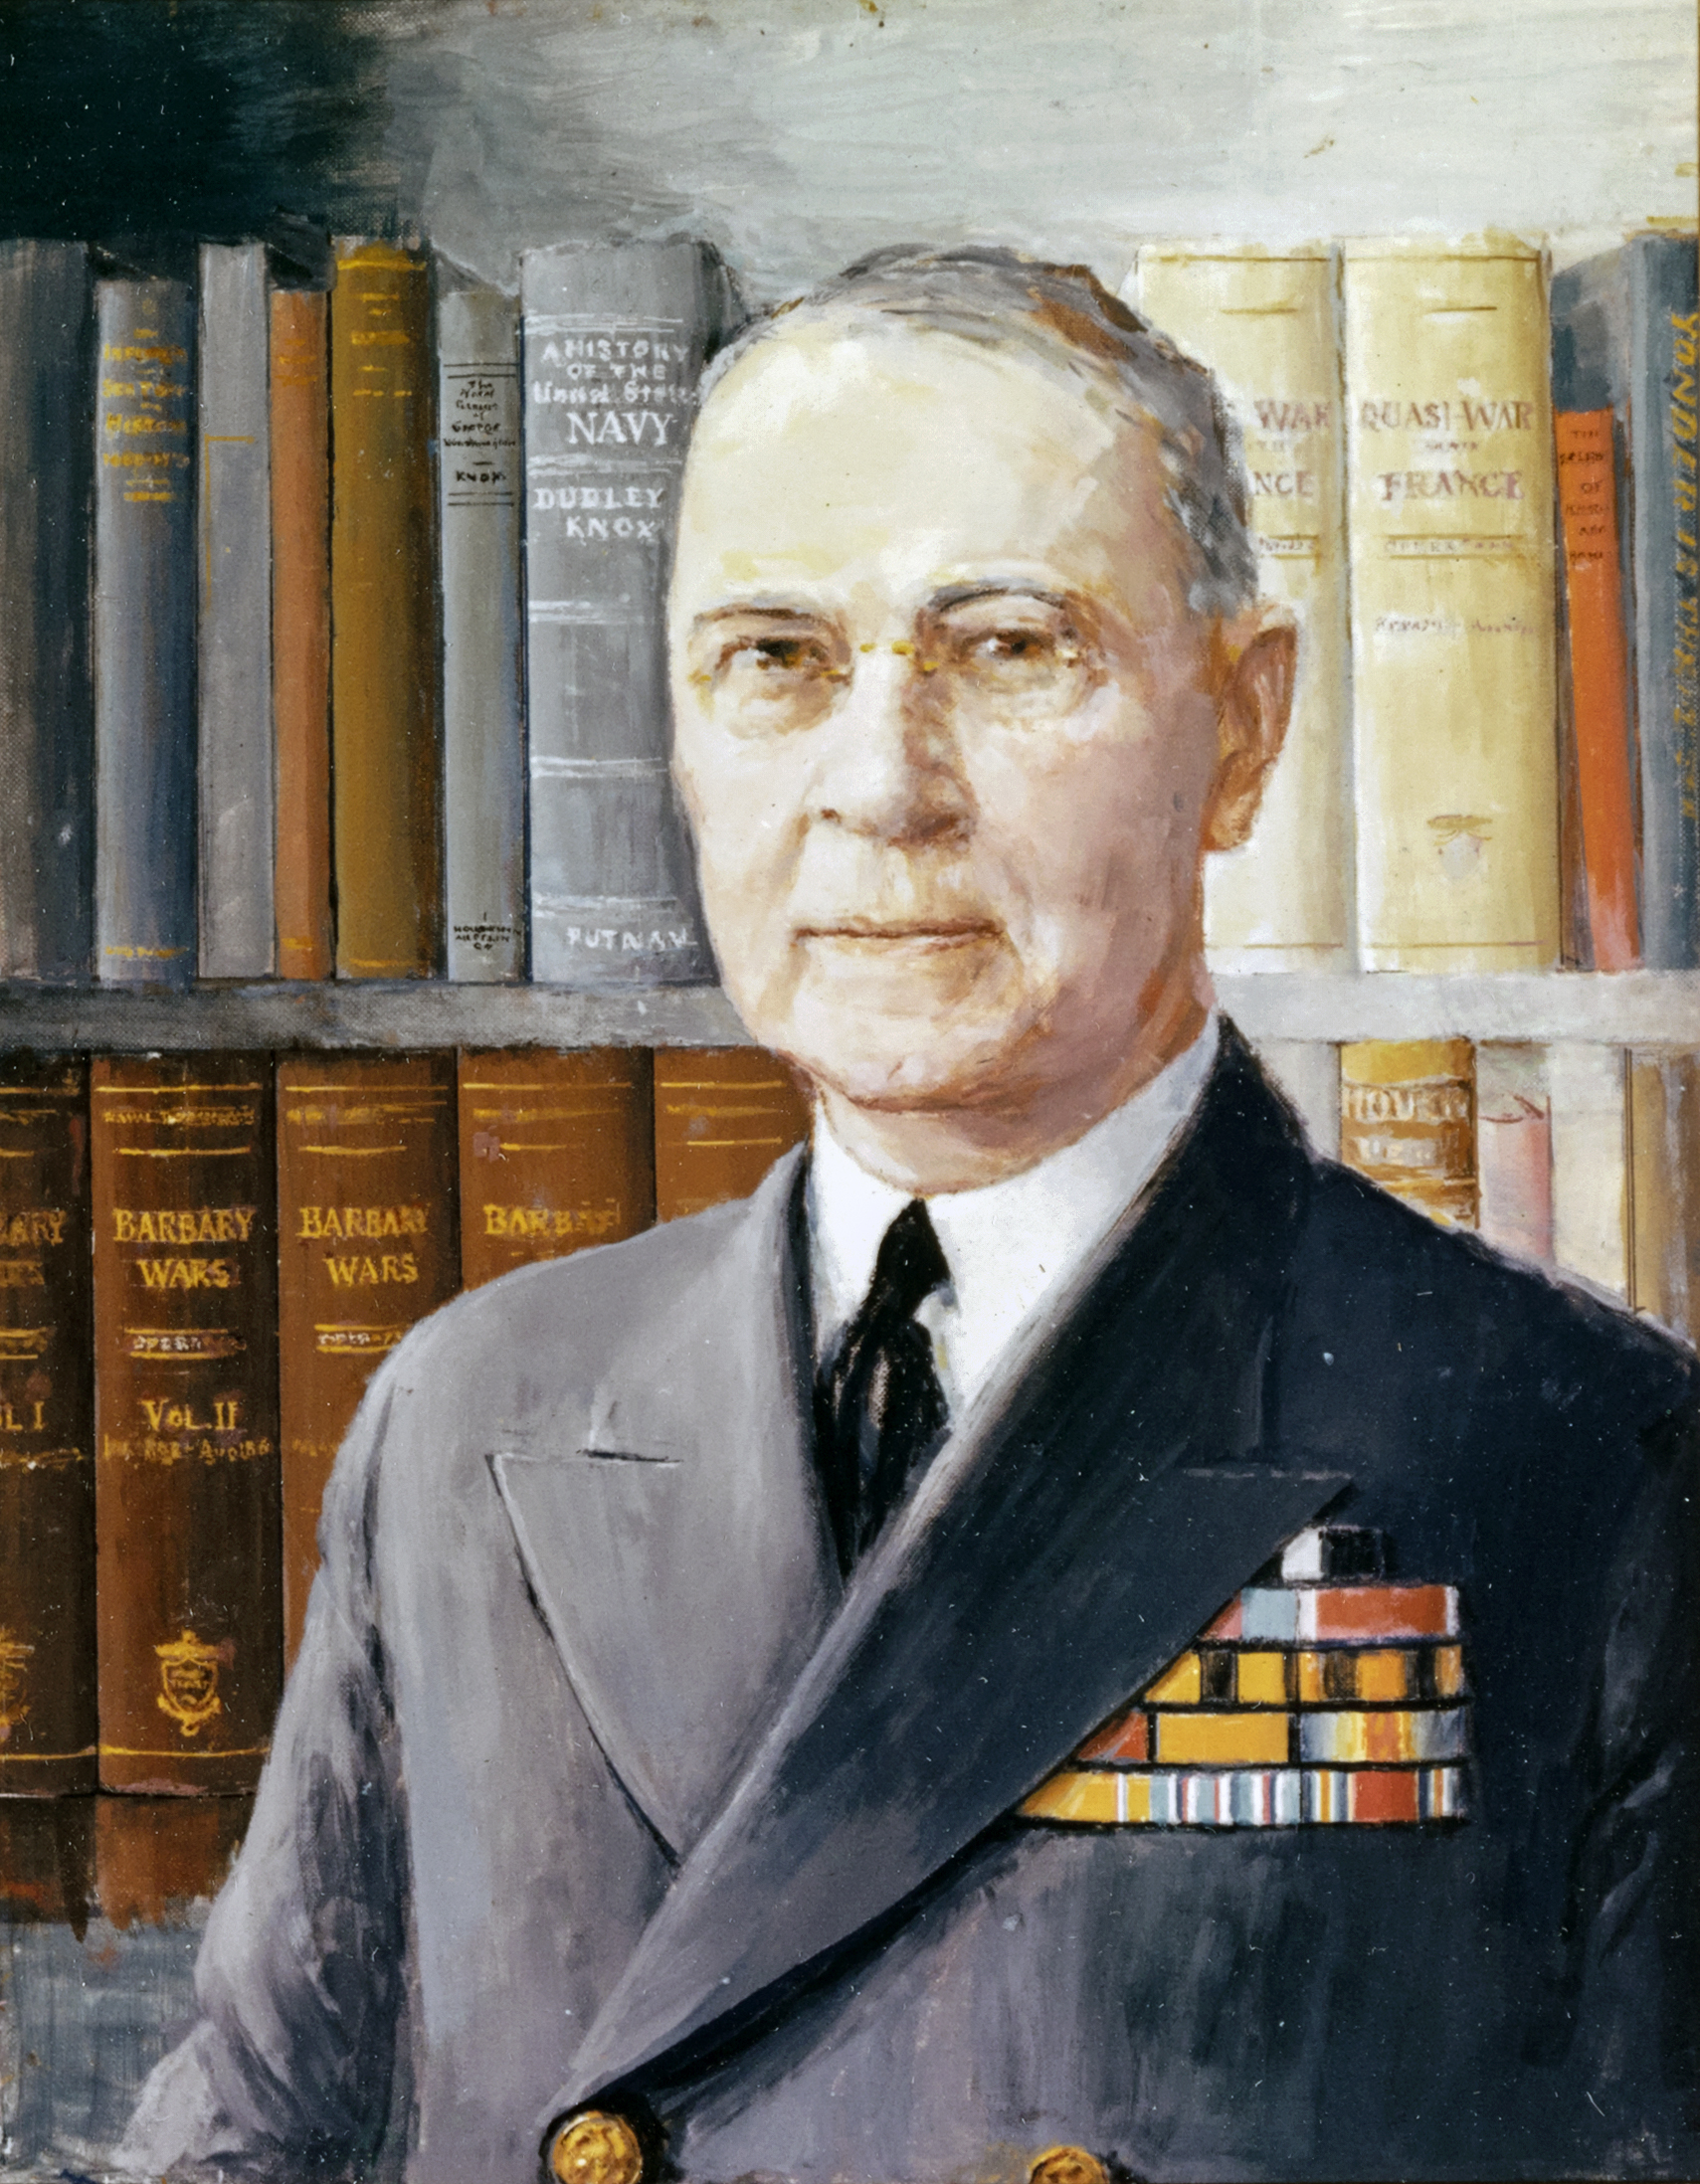 photograph of an oil painting by Captain Charles Bittinger, USNR